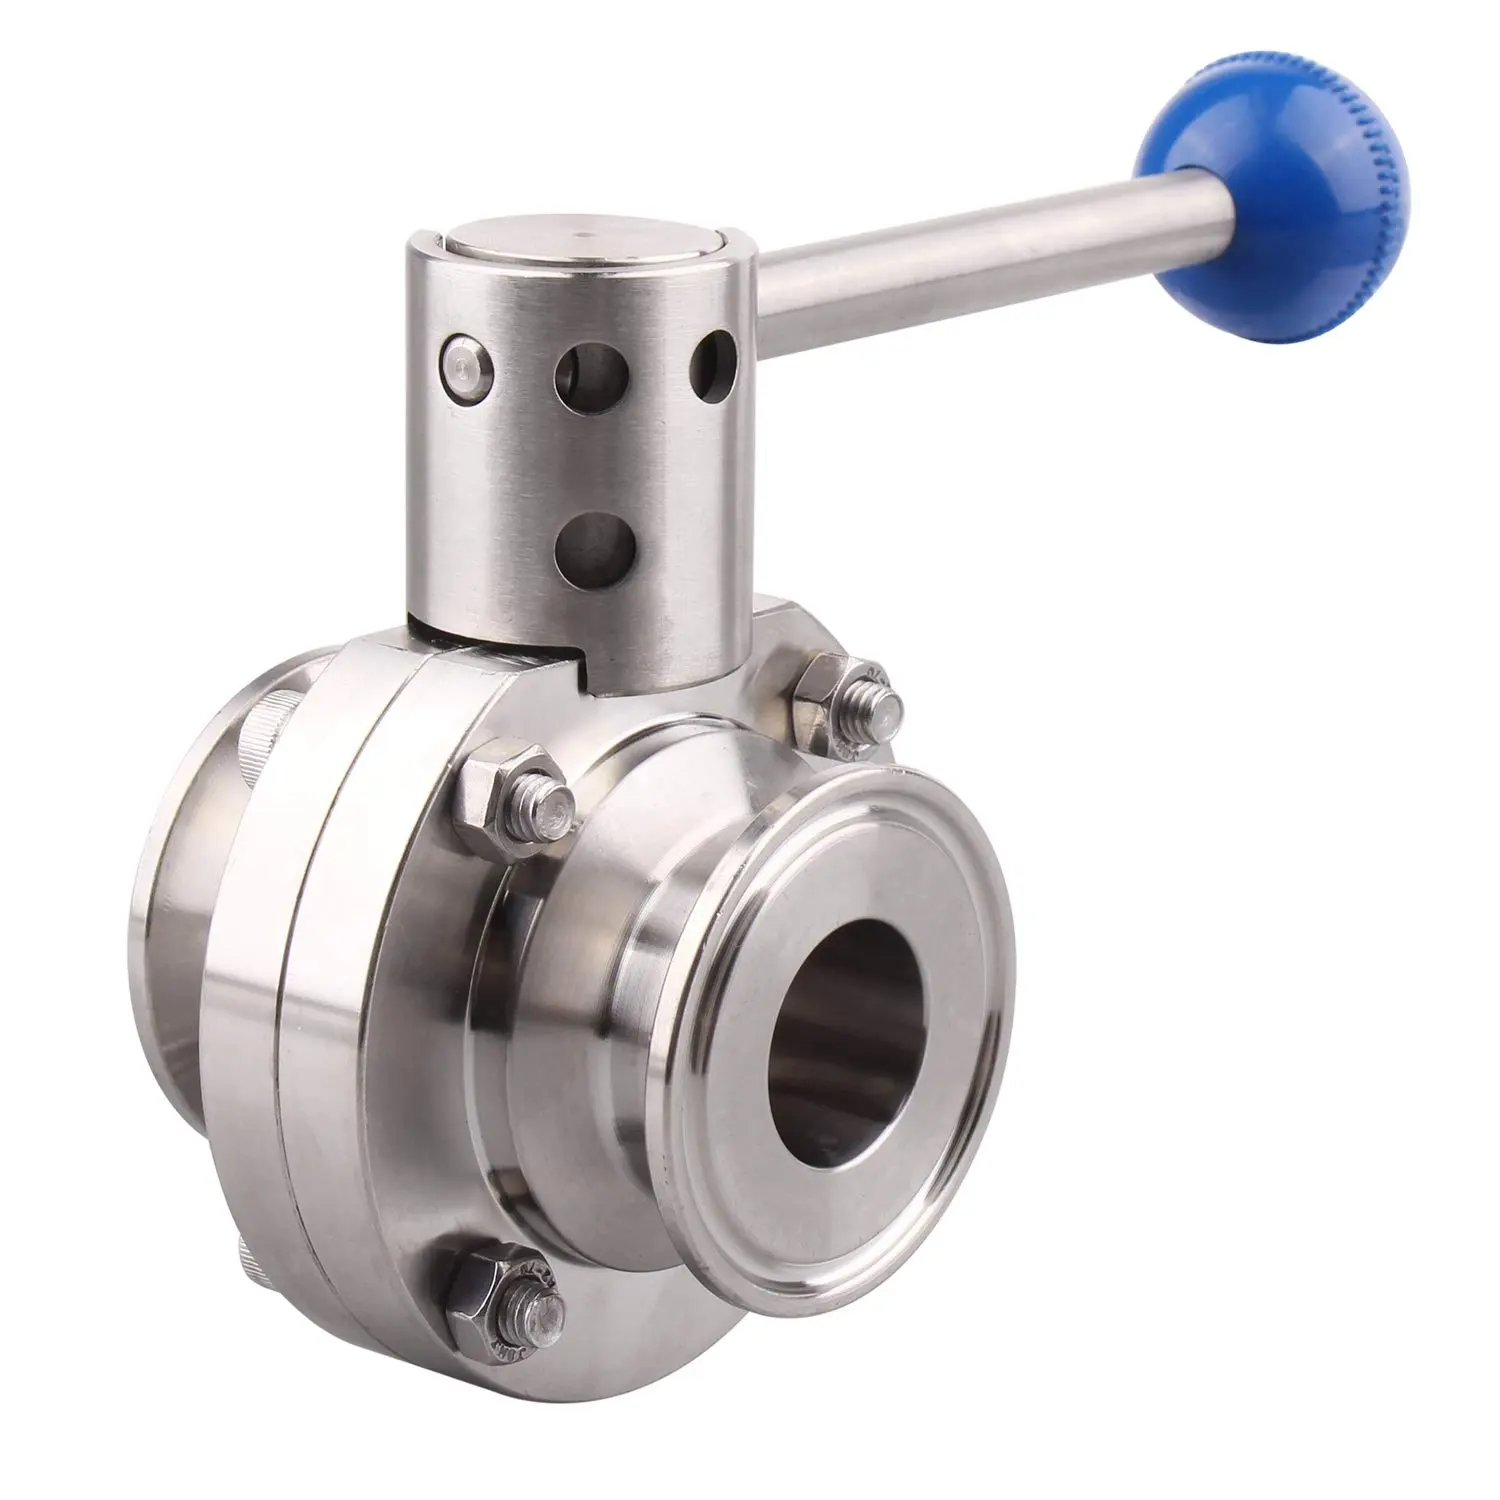 Normal Temperature Manual Shut Off Butterfly Industrial Valve Tri Clamp Ptfe Handle Control Aisi-304 Disc